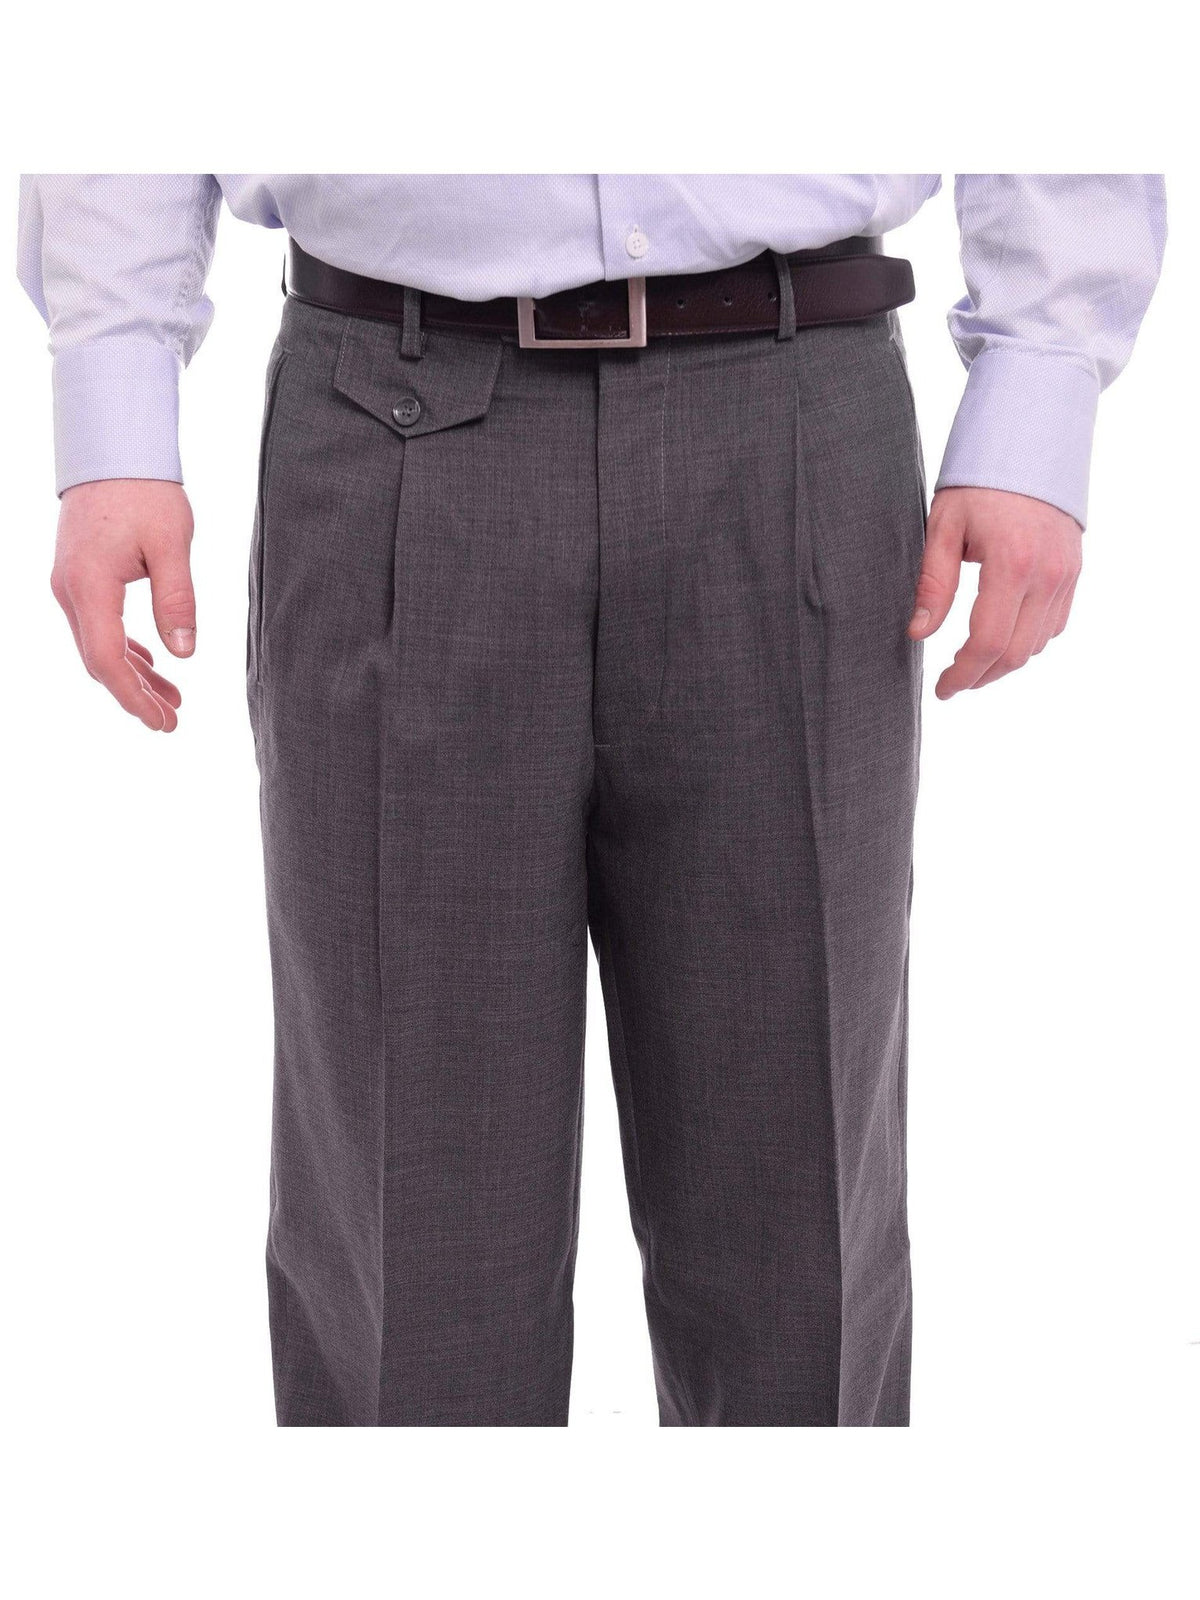 Apollo King PANTS Apollo King Classic Fit Gray Heather Pleated Wide Leg Wool Dress Pants